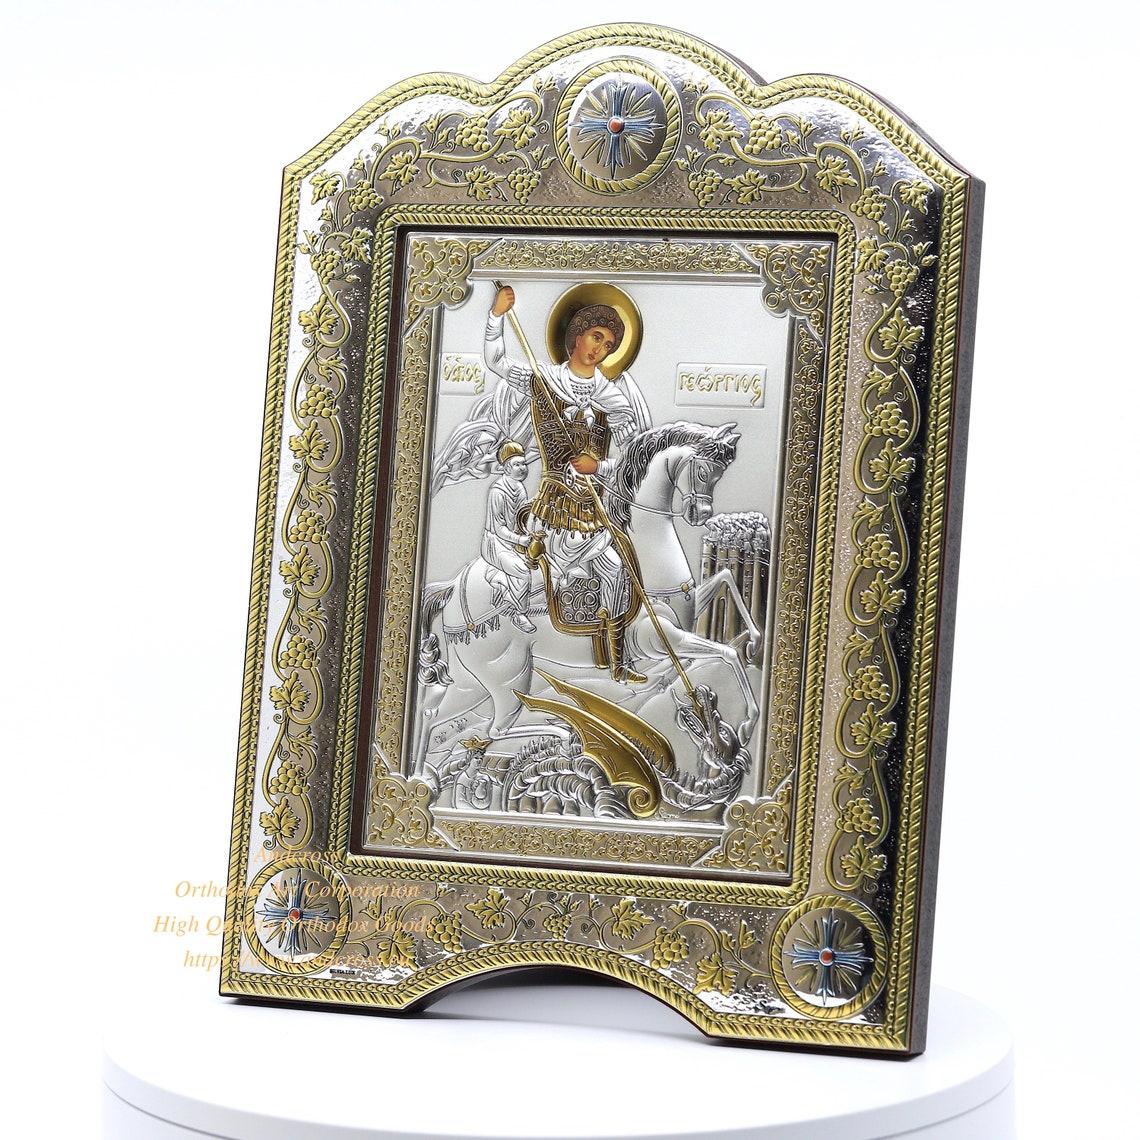 The Great Miraculous Christian Orthodox Silver icon-Of St. George The Victorious. 21cmx28cm Gold and Silver Version/Frame with glass. B112|The Great Miraculous Christian Orthodox Silver icon-Of St. George The Victorious. 21cmx28cm Gold and Silver Version/Frame with glass. B112|The Great Miraculous Christian Orthodox Silver icon-Of St. George The Victorious. 21cmx28cm Gold and Silver Version/Frame with glass. B112|The Great Miraculous Christian Orthodox Silver icon-Of St. George The Victorious. 21cmx28cm Gold and Silver Version/Frame with glass. B112|The Great Miraculous Christian Orthodox Silver icon-Of St. George The Victorious. 21cmx28cm Gold and Silver Version/Frame with glass. B112|The Great Miraculous Christian Orthodox Silver icon-Of St. George The Victorious. 21cmx28cm Gold and Silver Version/Frame with glass. B112|The Great Miraculous Christian Orthodox Silver icon-Of St. George The Victorious. 21cmx28cm Gold and Silver Version/Frame with glass. B112|The Great Miraculous Christian Orthodox Silver icon-Of St. George The Victorious. 21cmx28cm Gold and Silver Version/Frame with glass. B112